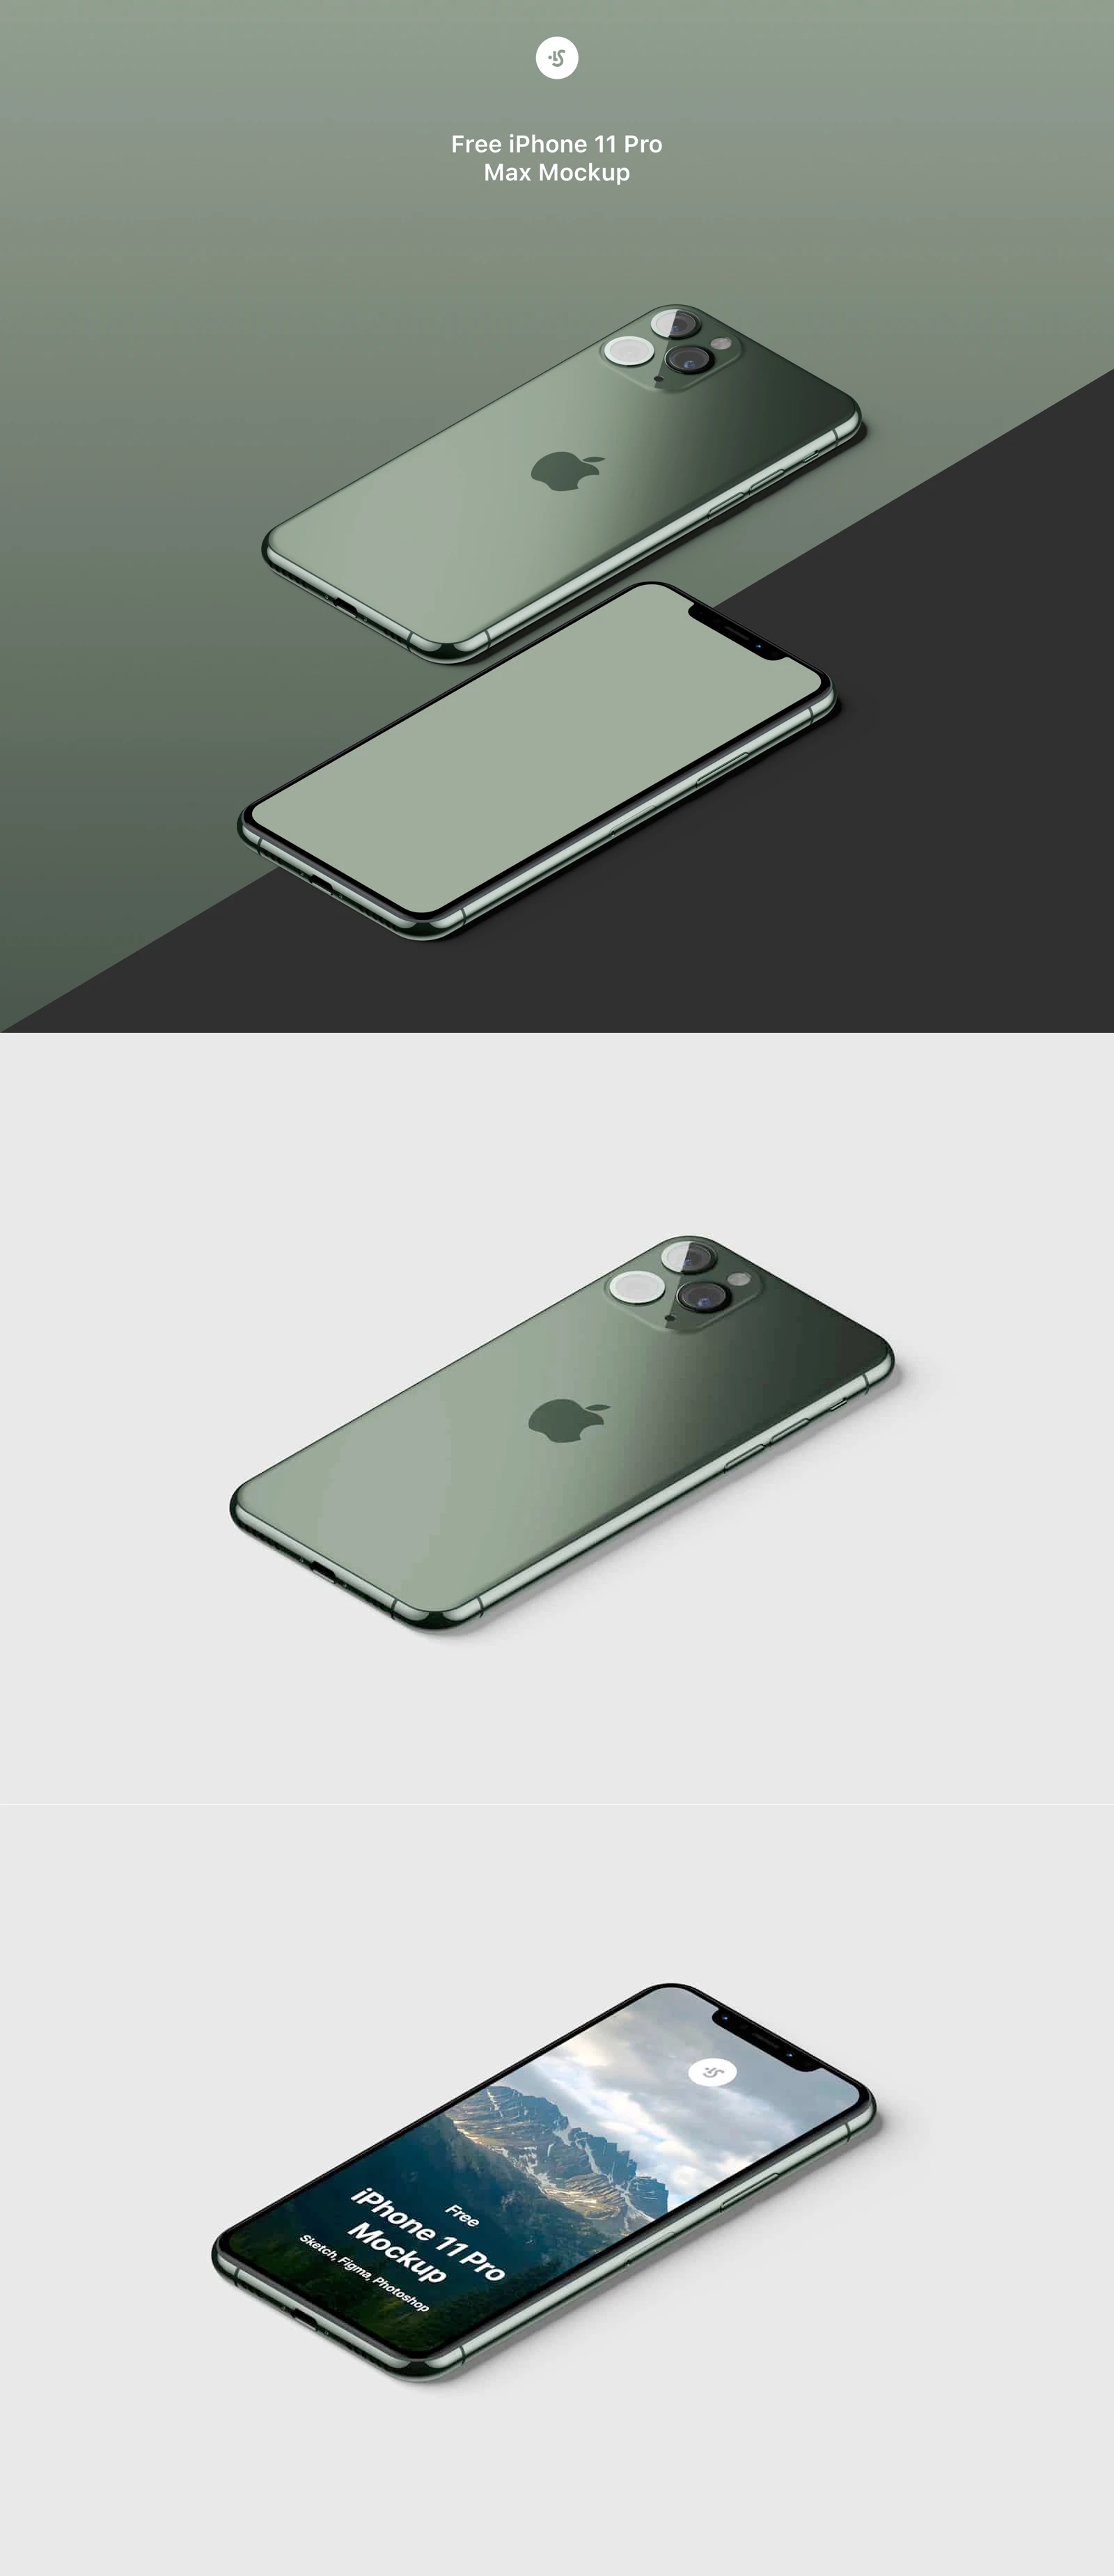 Free iPhone 11 Pro Isometric Mockup - Check this awesome isometric iPhone 11 Pro mockup. Everything is separated and movable, that's allows you to create own compositions.